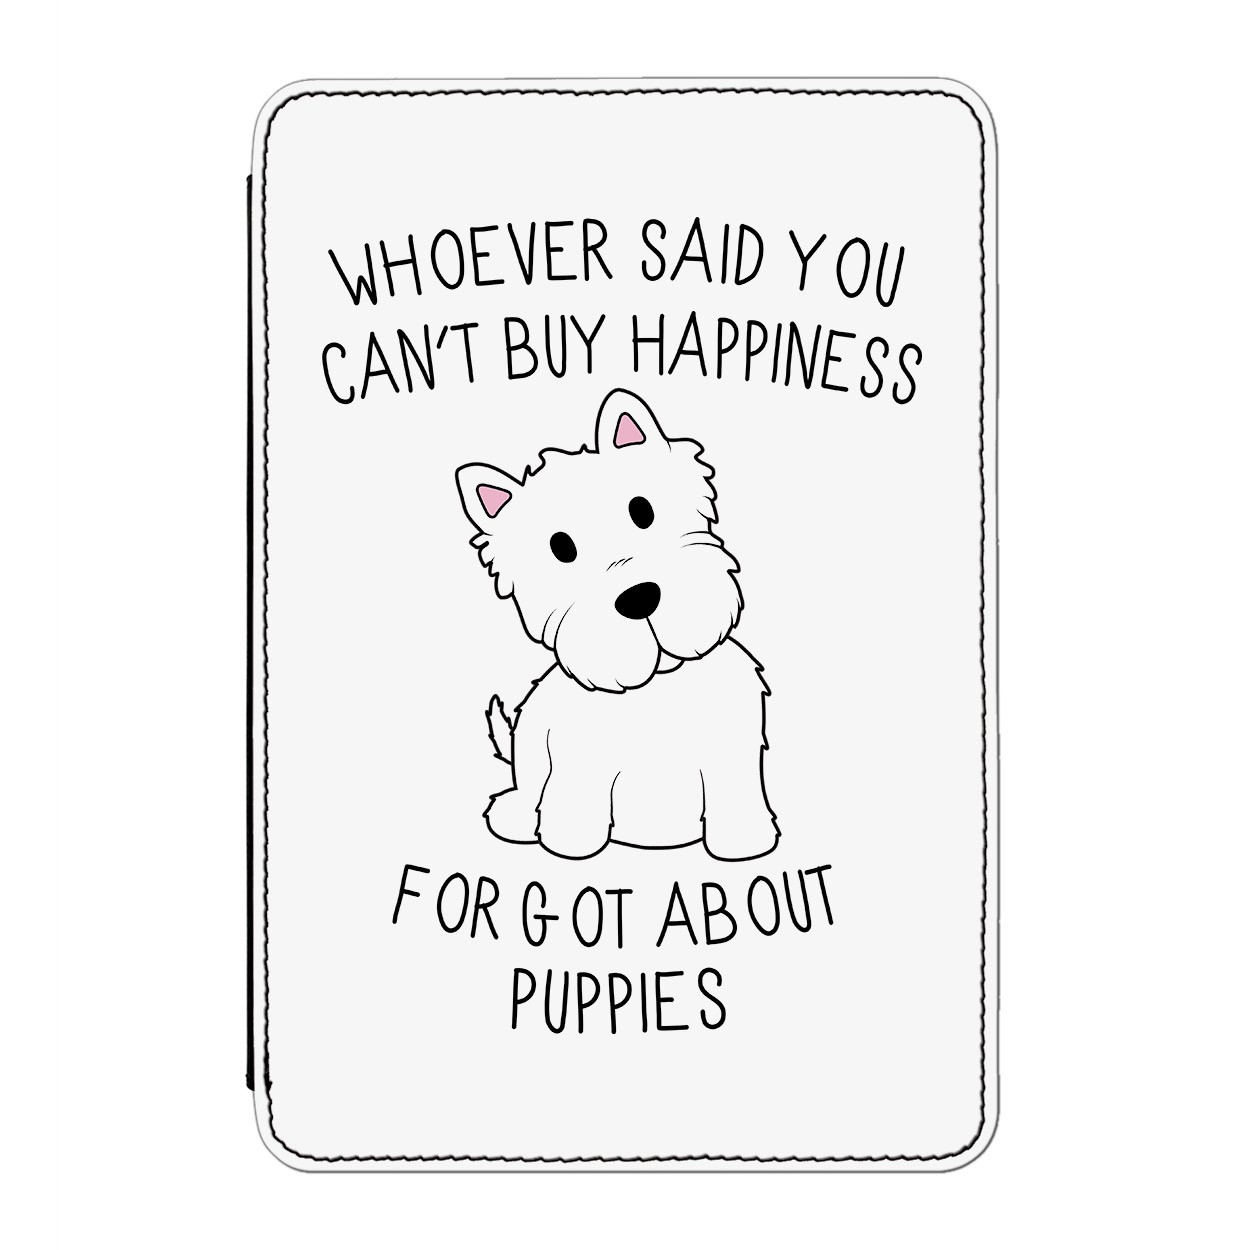 Whoever Said You Can't Buy Happiness Forgot About Puppies Case Cover for iPad Mini 4